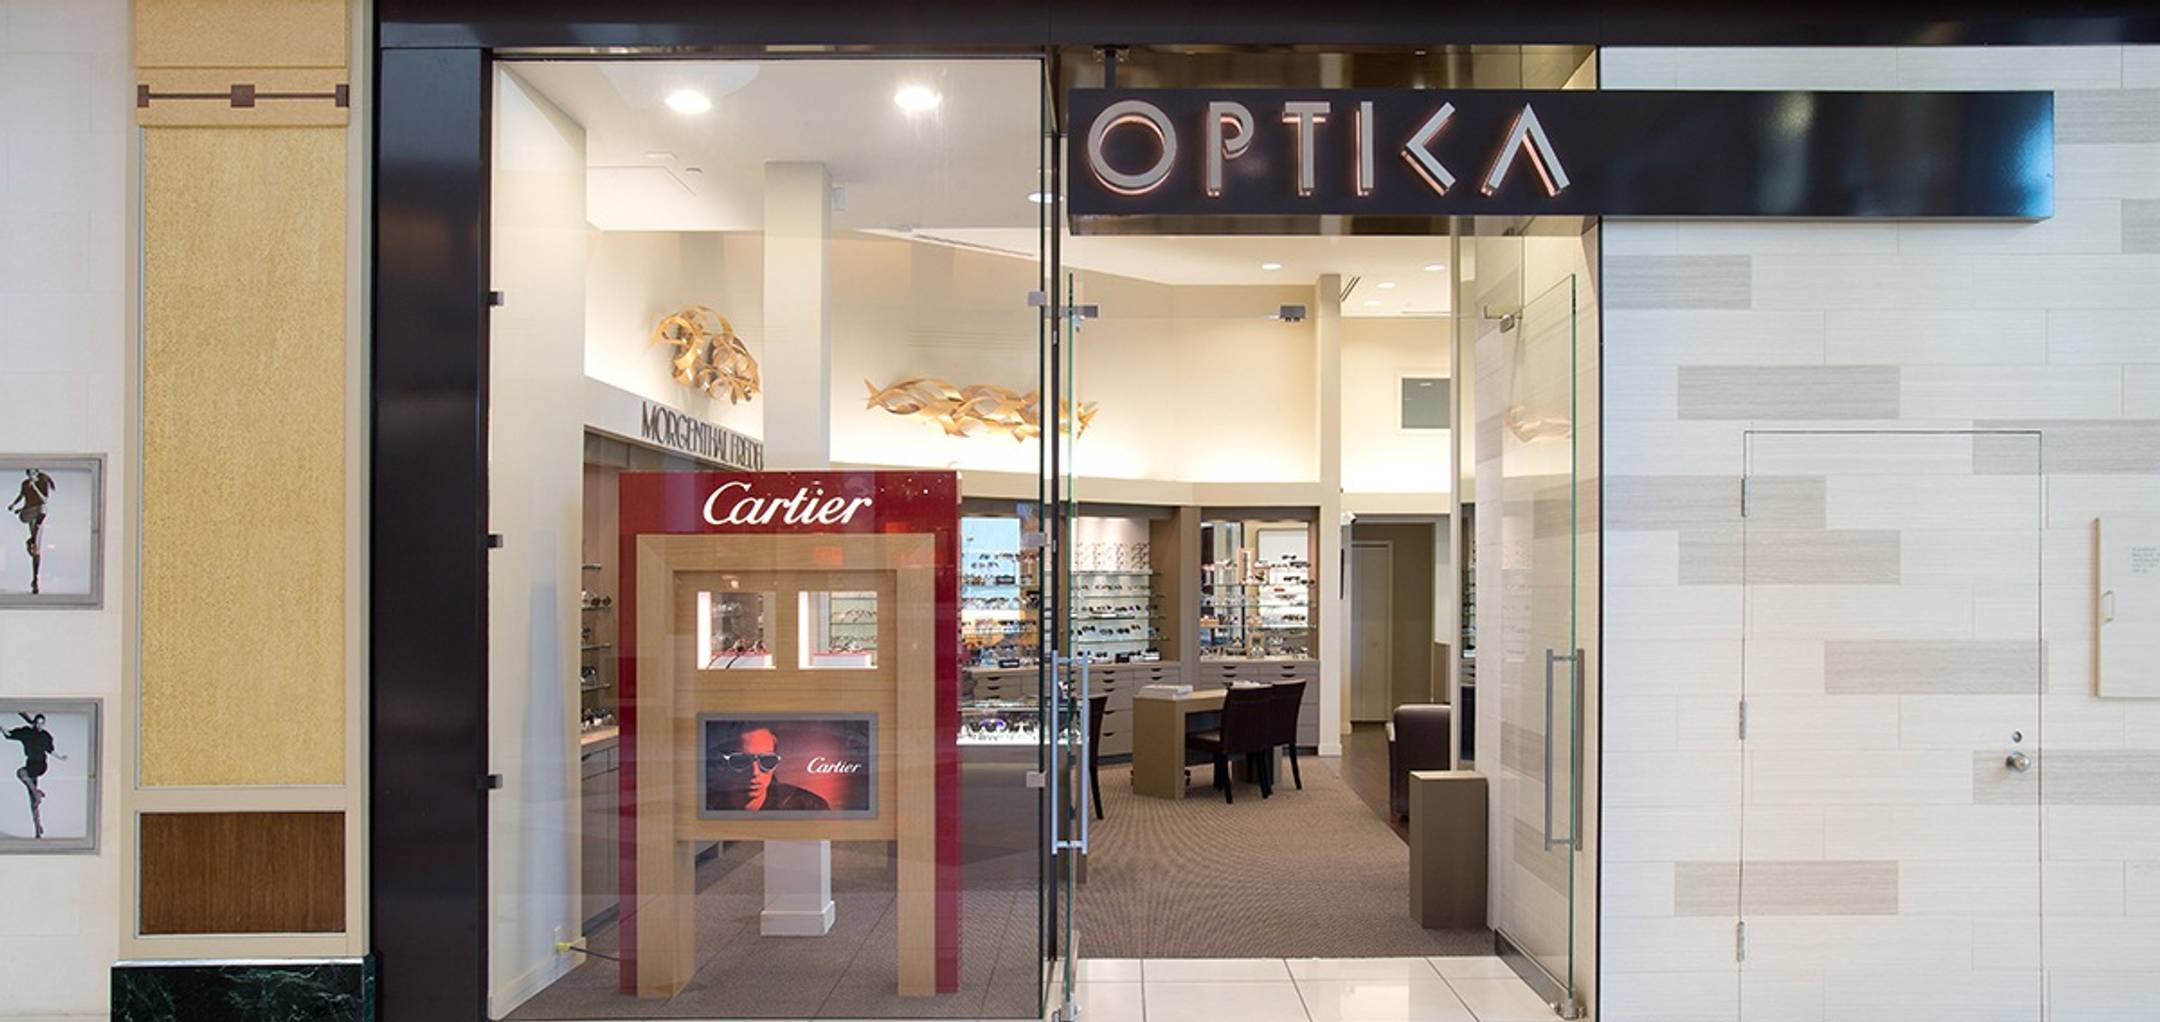 Optica store front